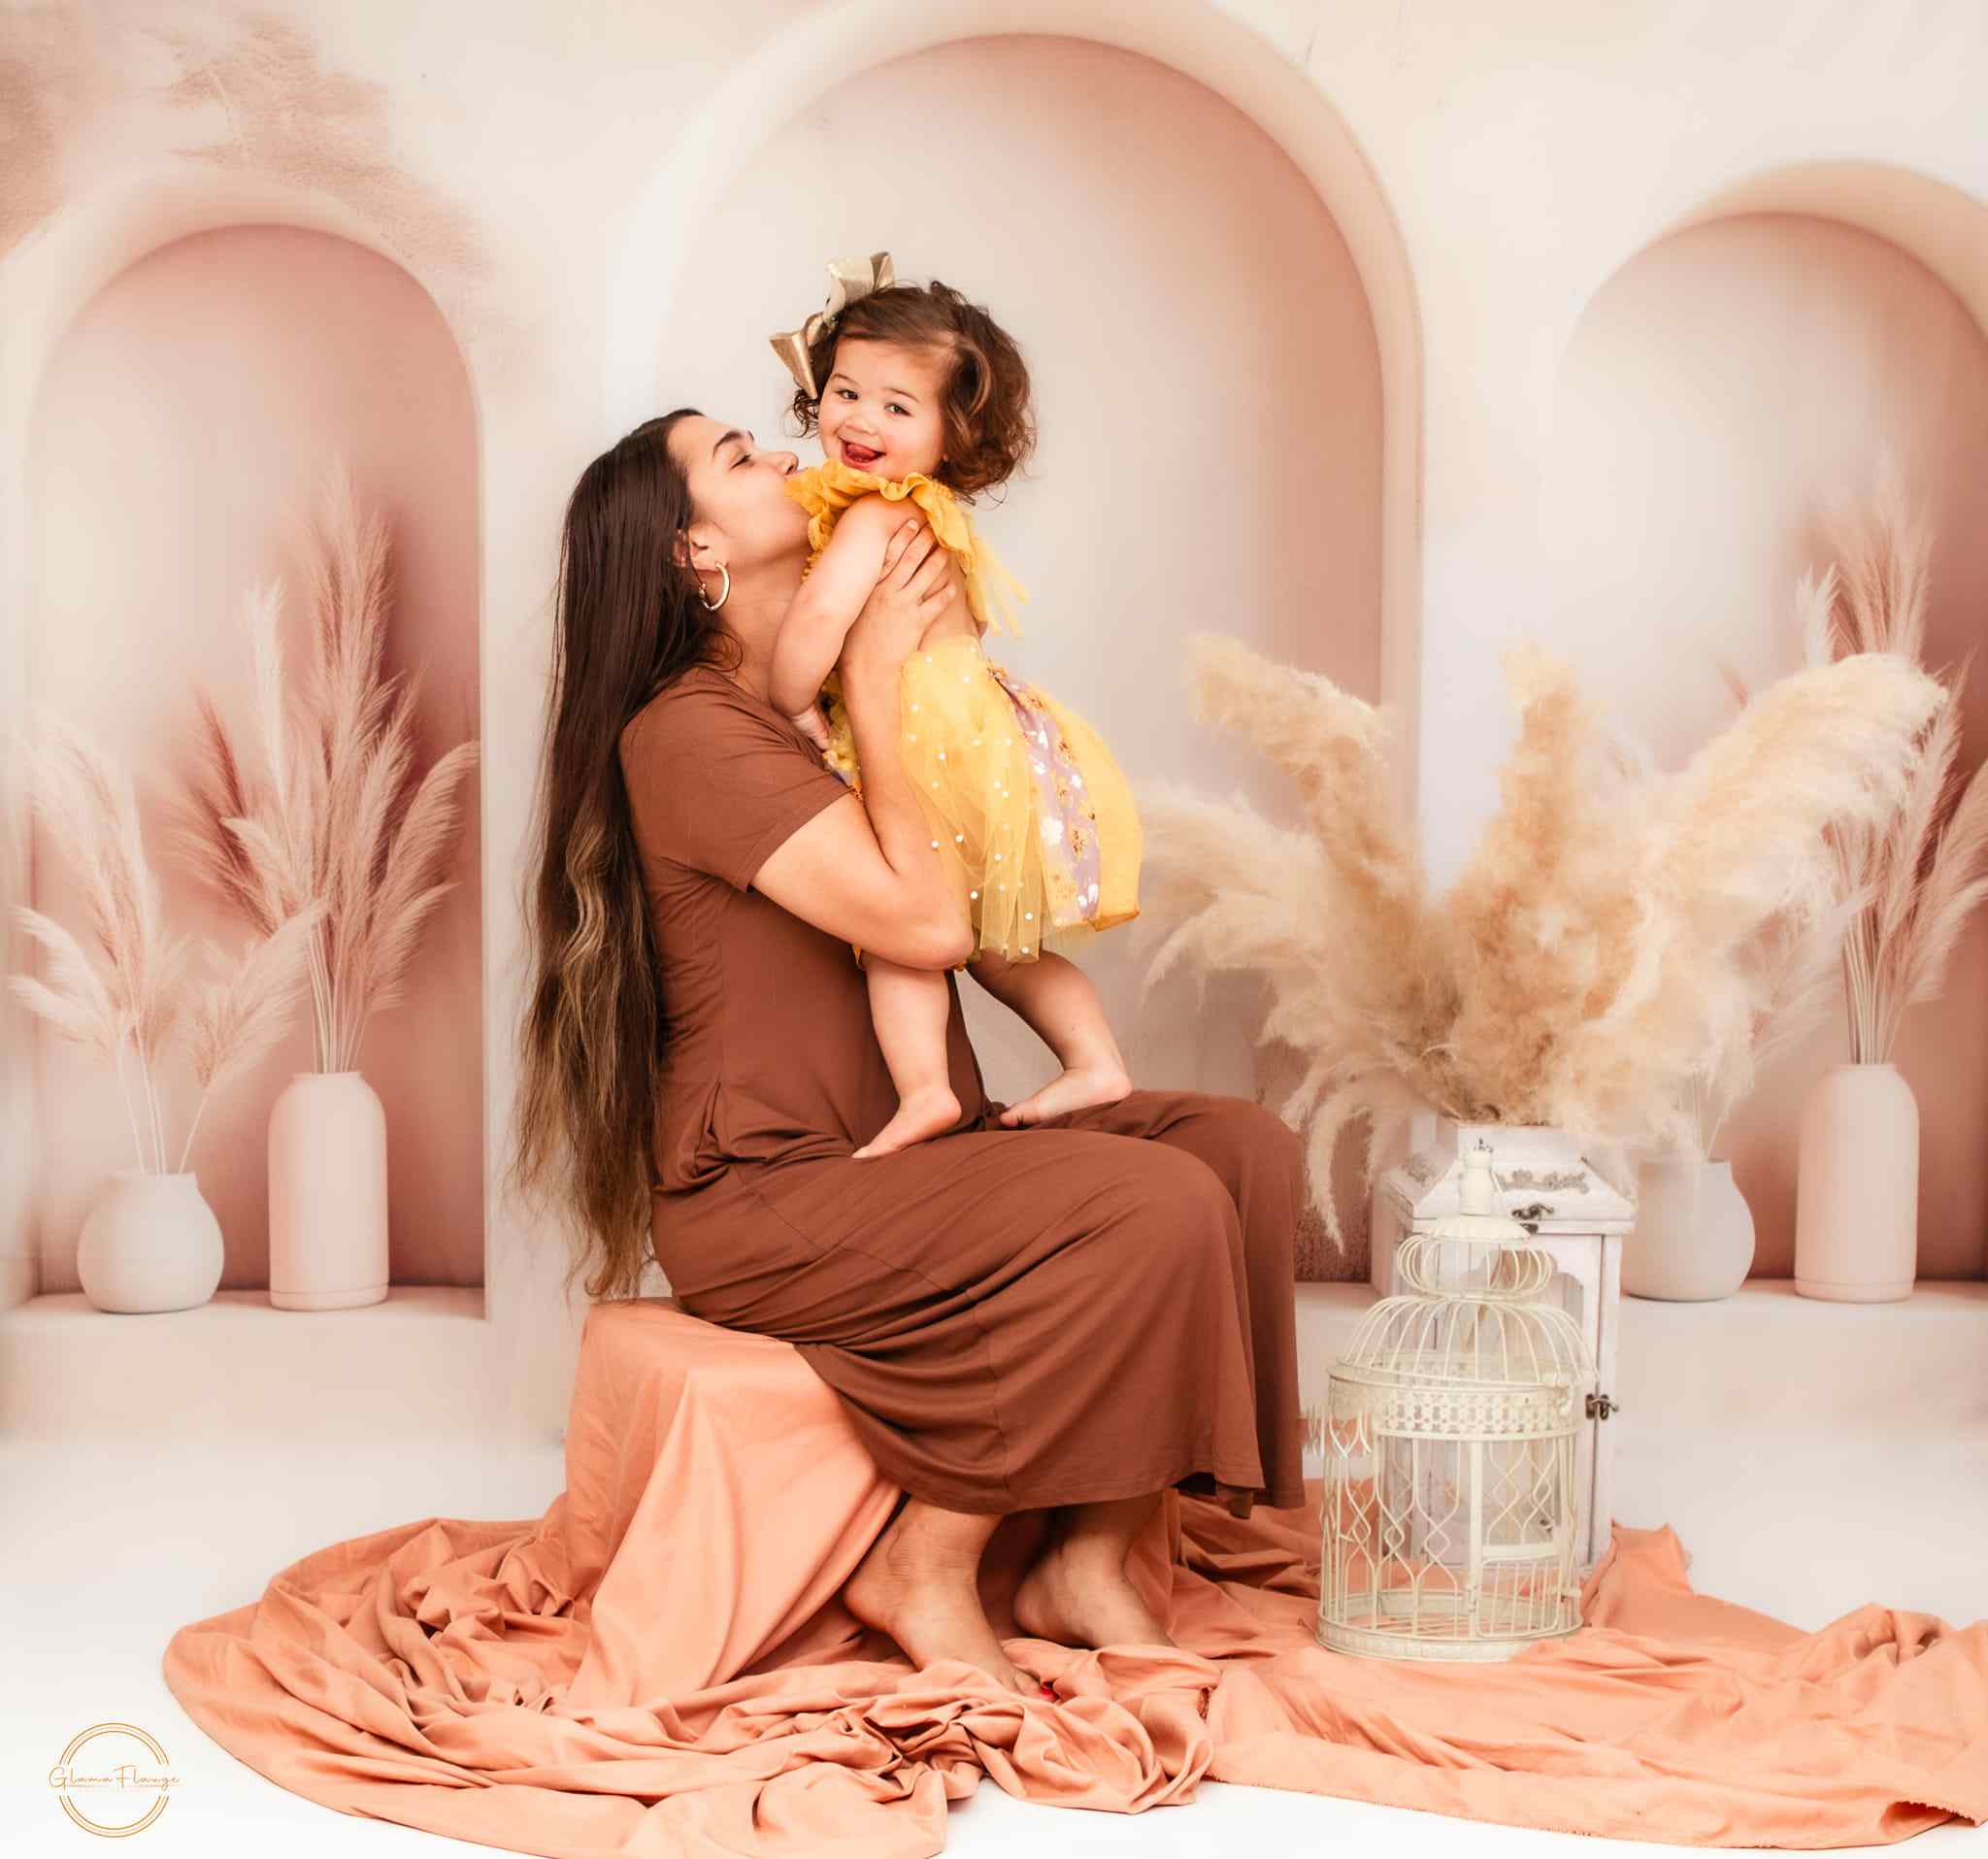 Mom holding daughter in front of beige arched wall Backdrop